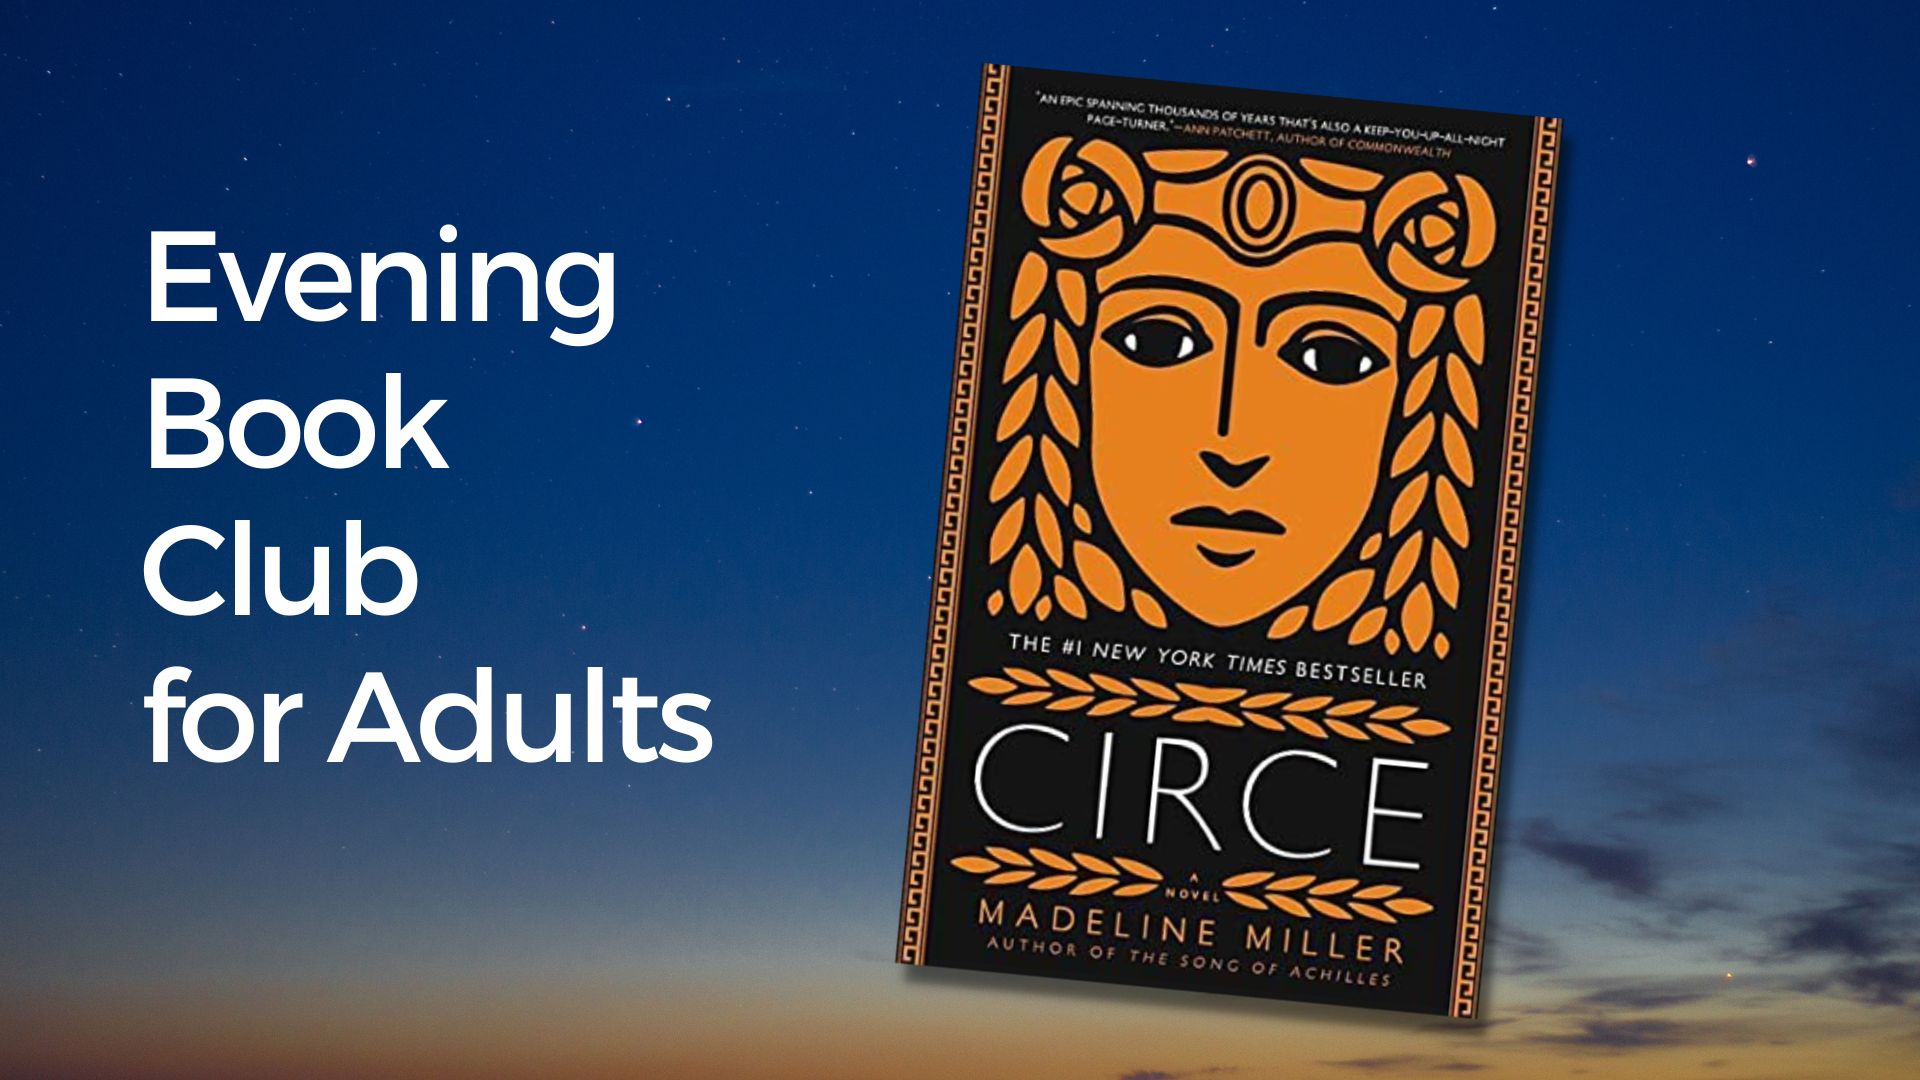 Evening Book Club selection Circe by Madeline Miller